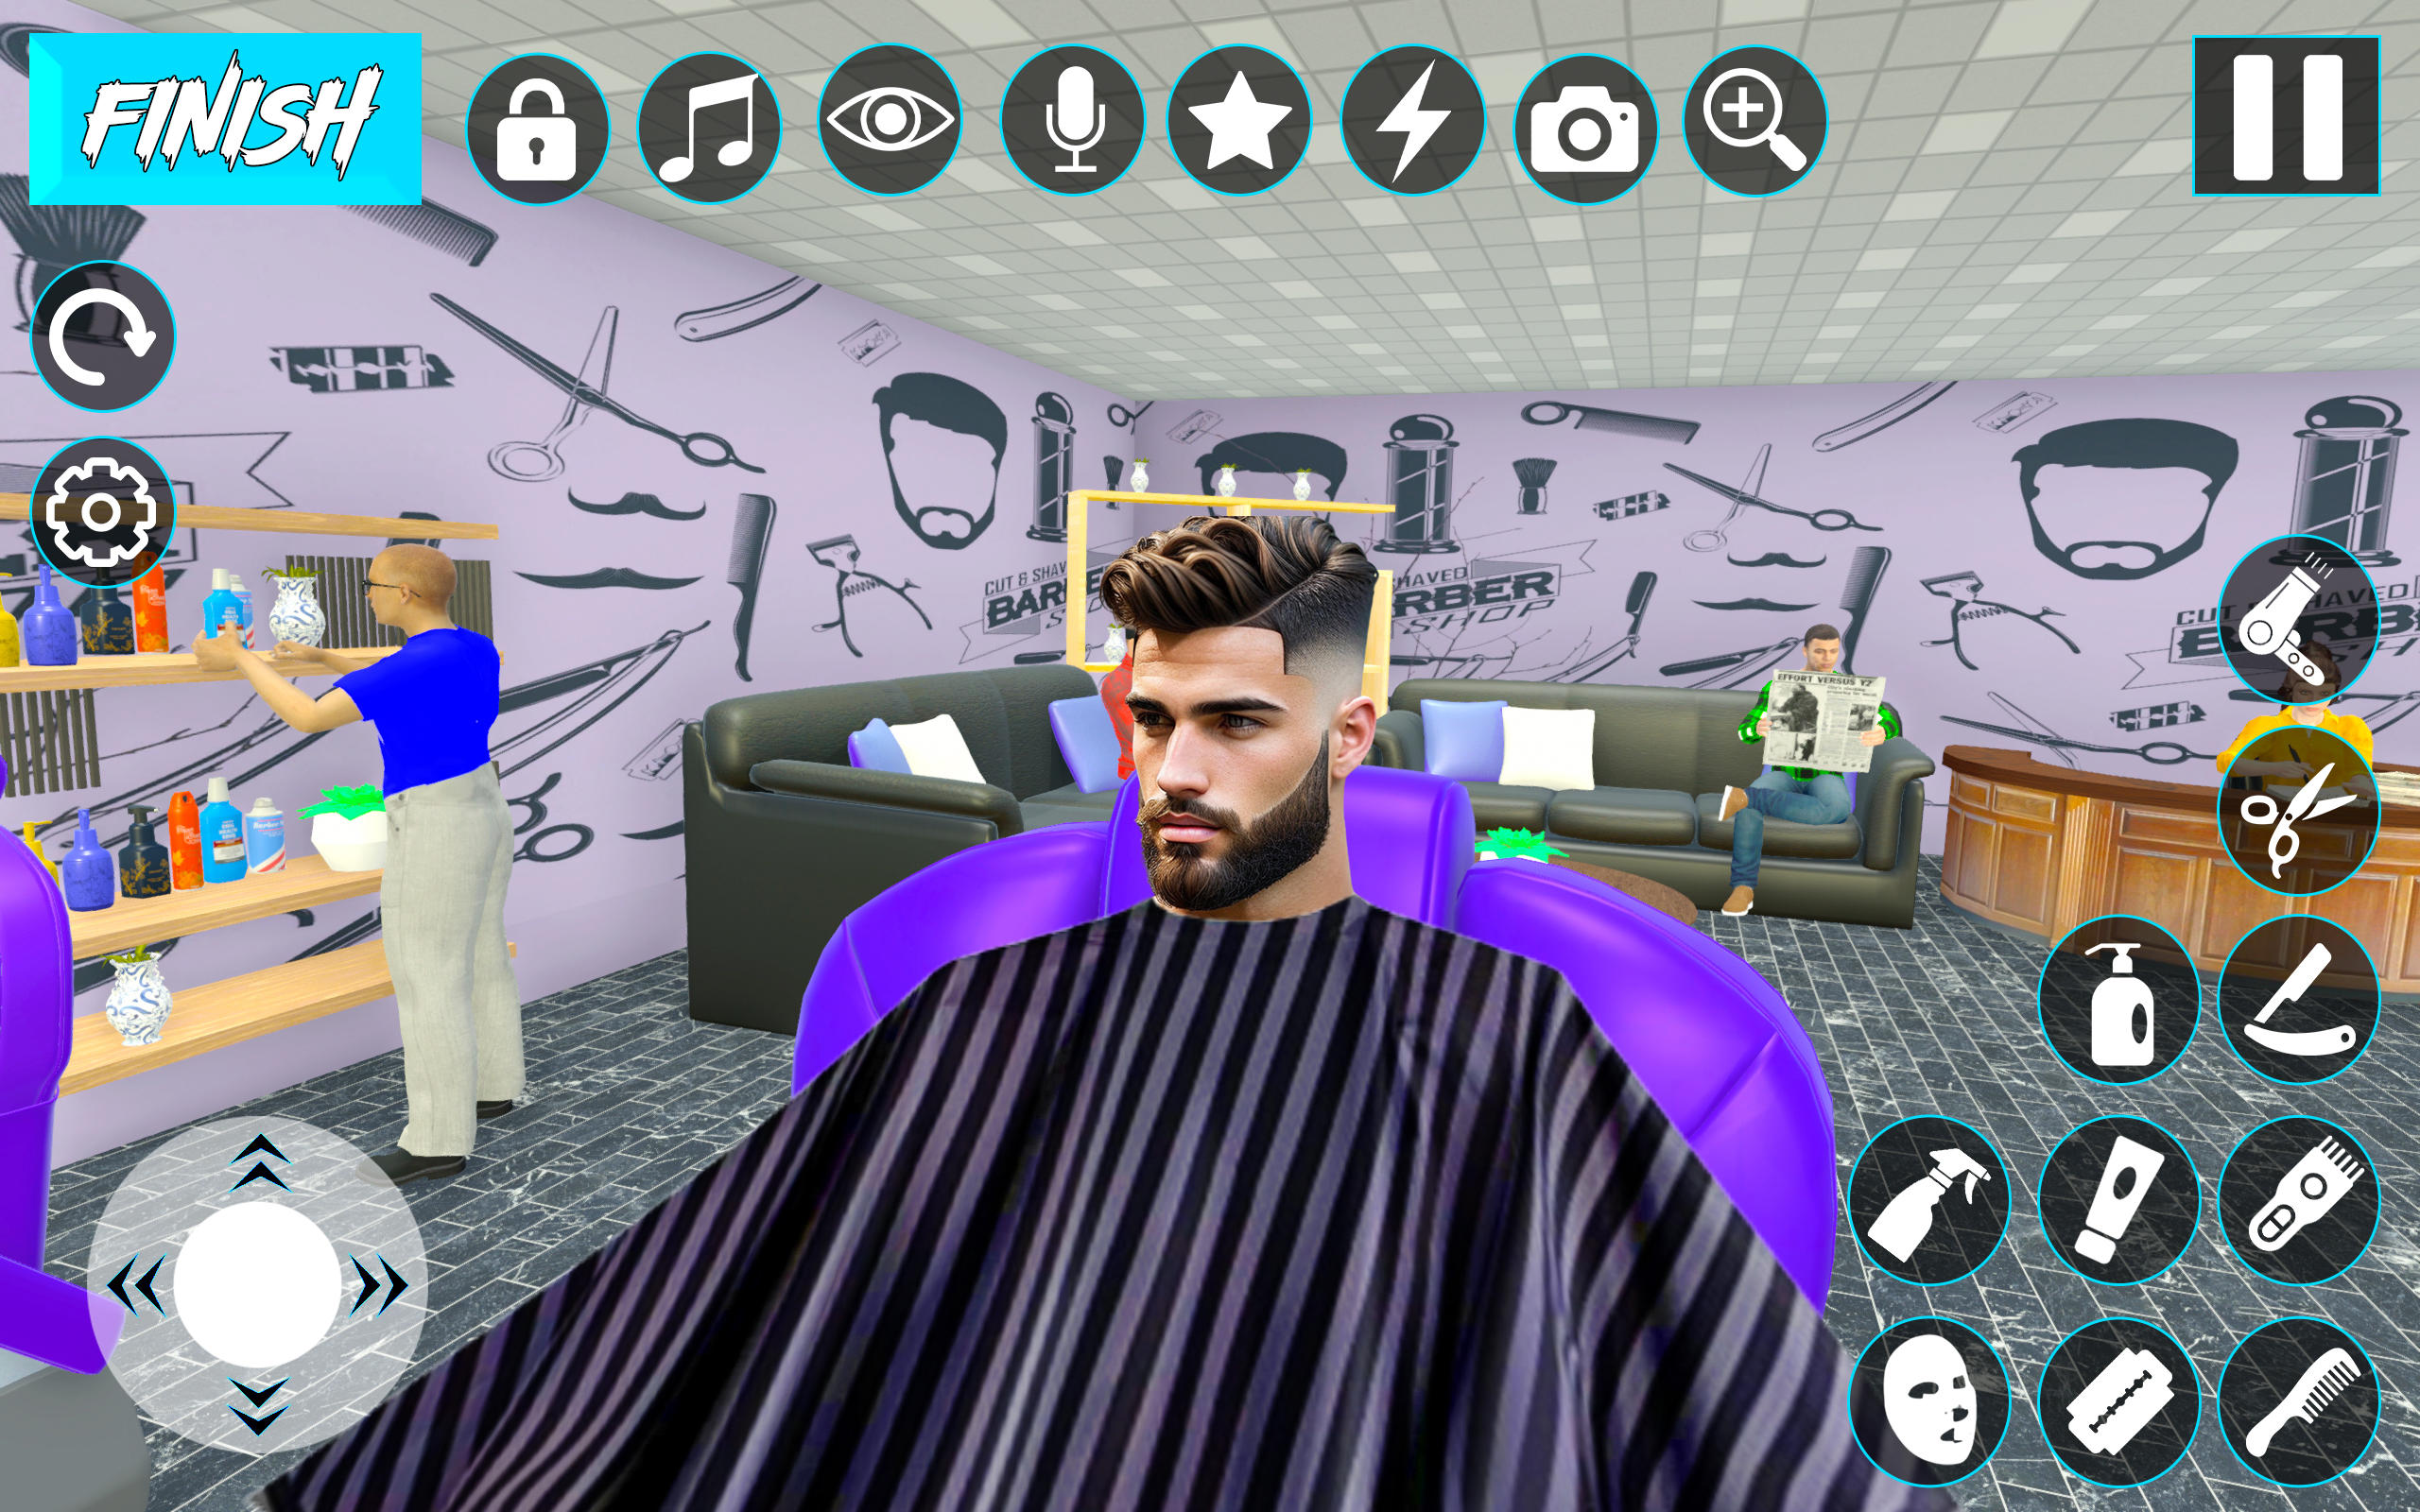 Barber Shop beard Cutting Game – Apps on Google Play